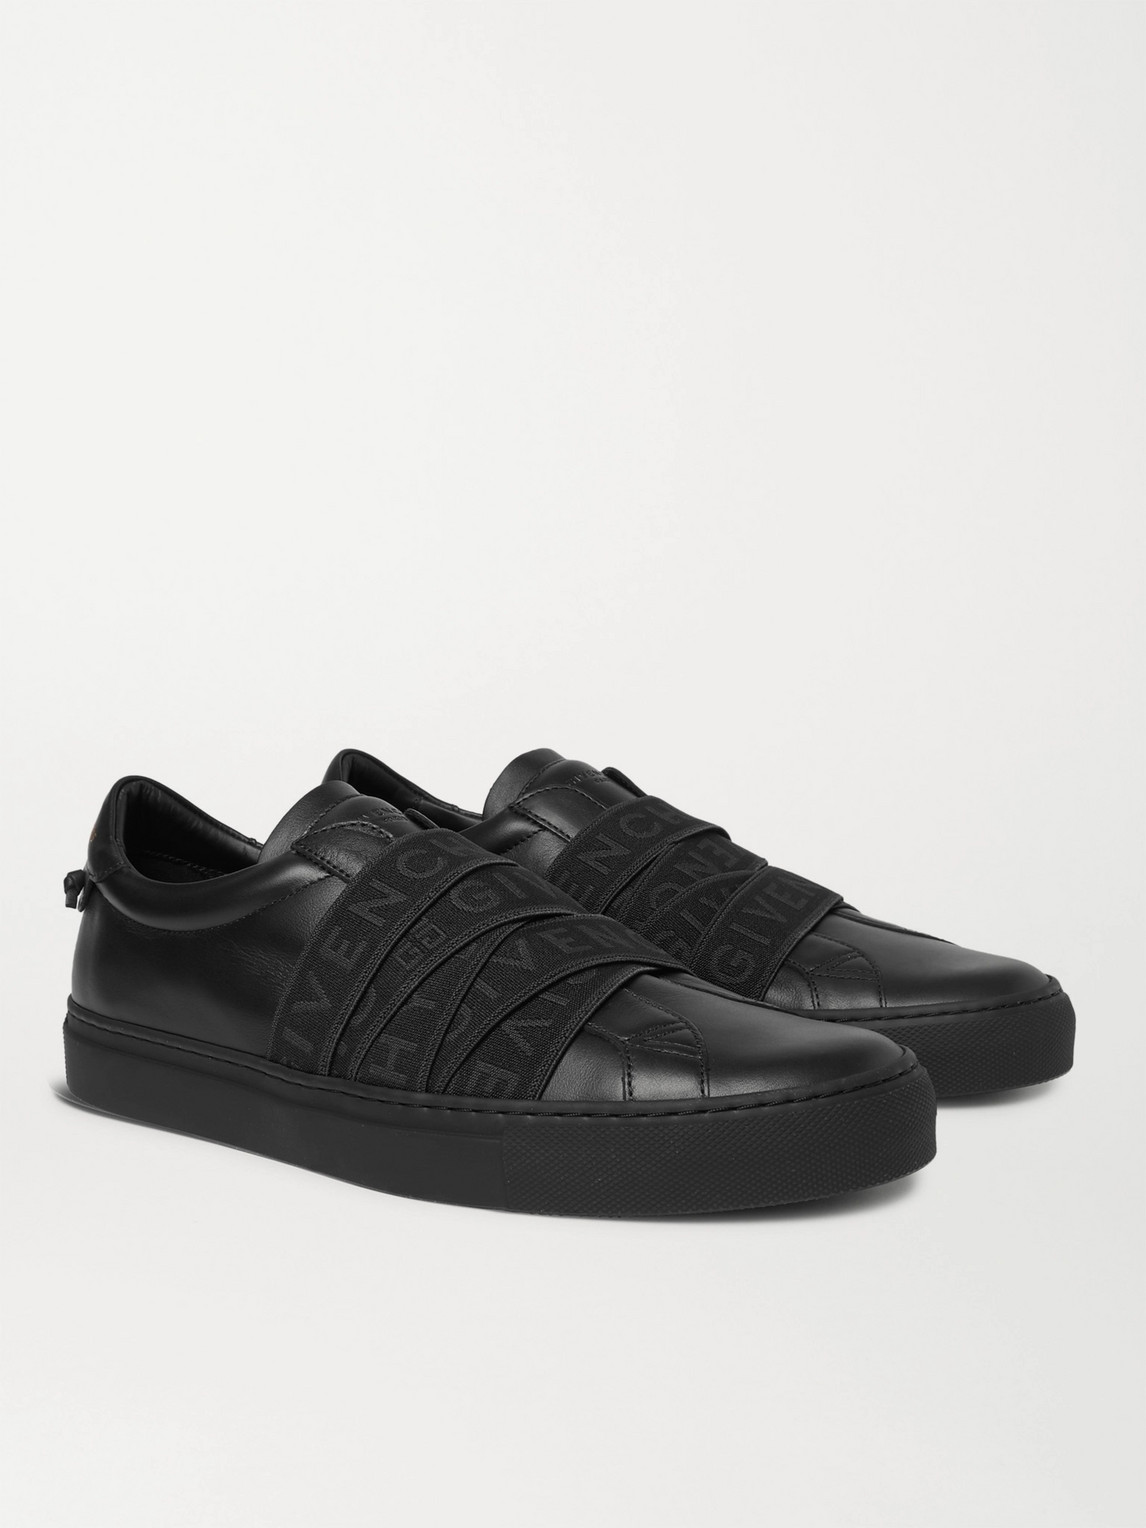 GIVENCHY URBAN STREET LOGO-JACQUARD LEATHER SLIP-ON SNEAKERS